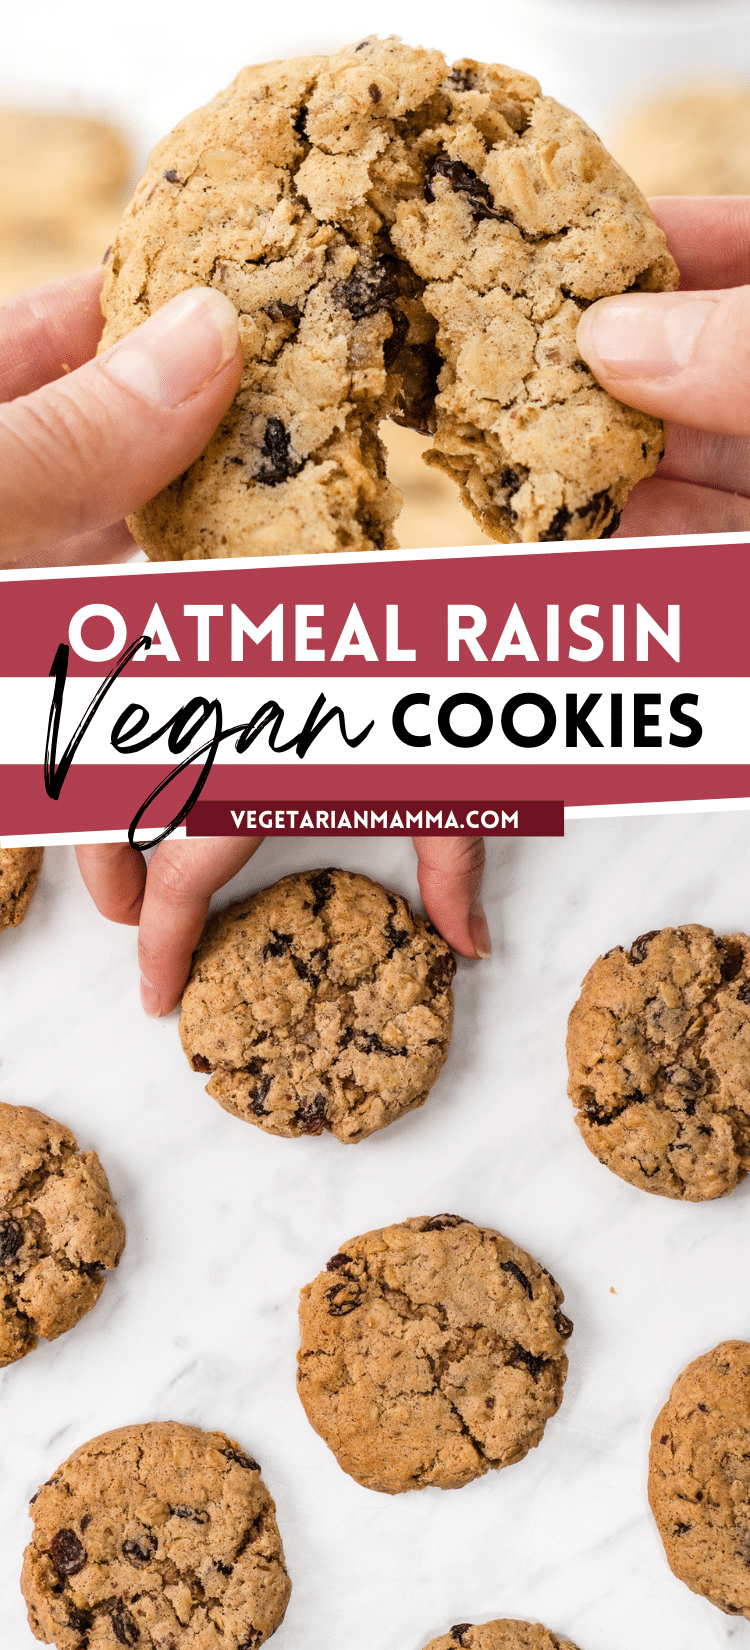 Vegan Oatmeal Raisin Cookies are an insanely easy twist on classic oatmeal raisin cookies. You will not miss the dairy, we promise!